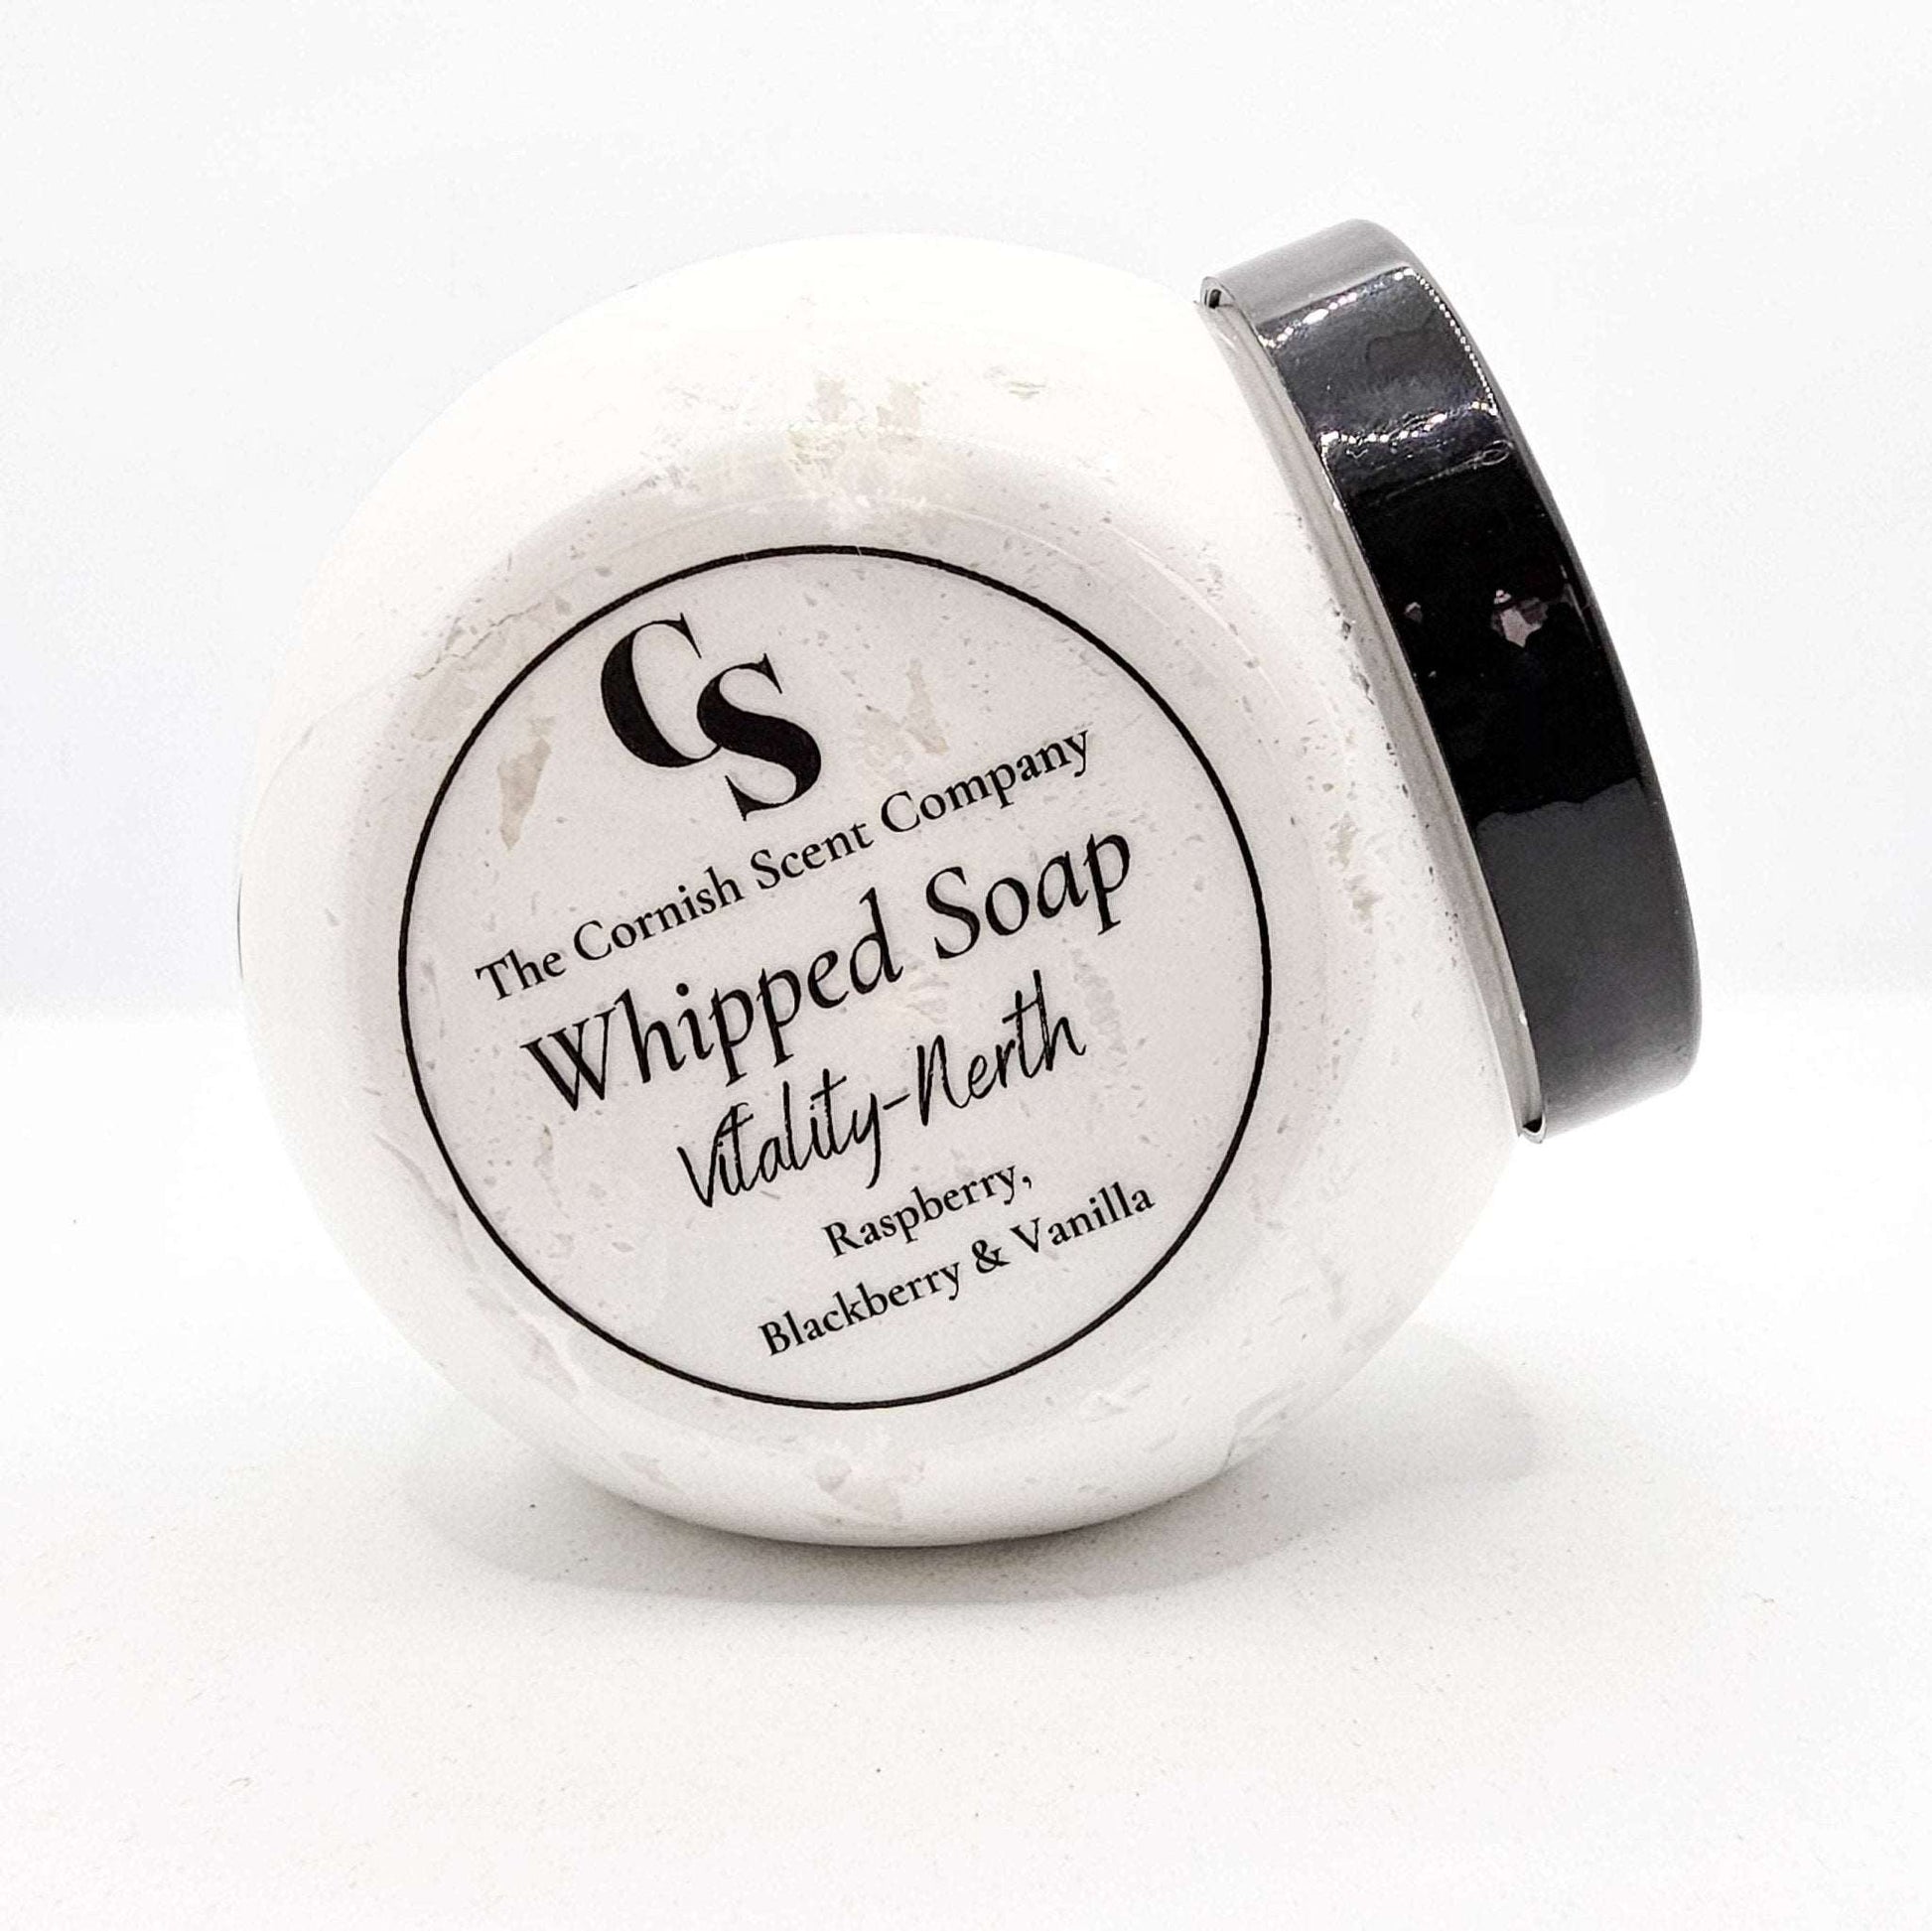 Vitality Whipped soap / bath mouse - The Cornish Scent Company